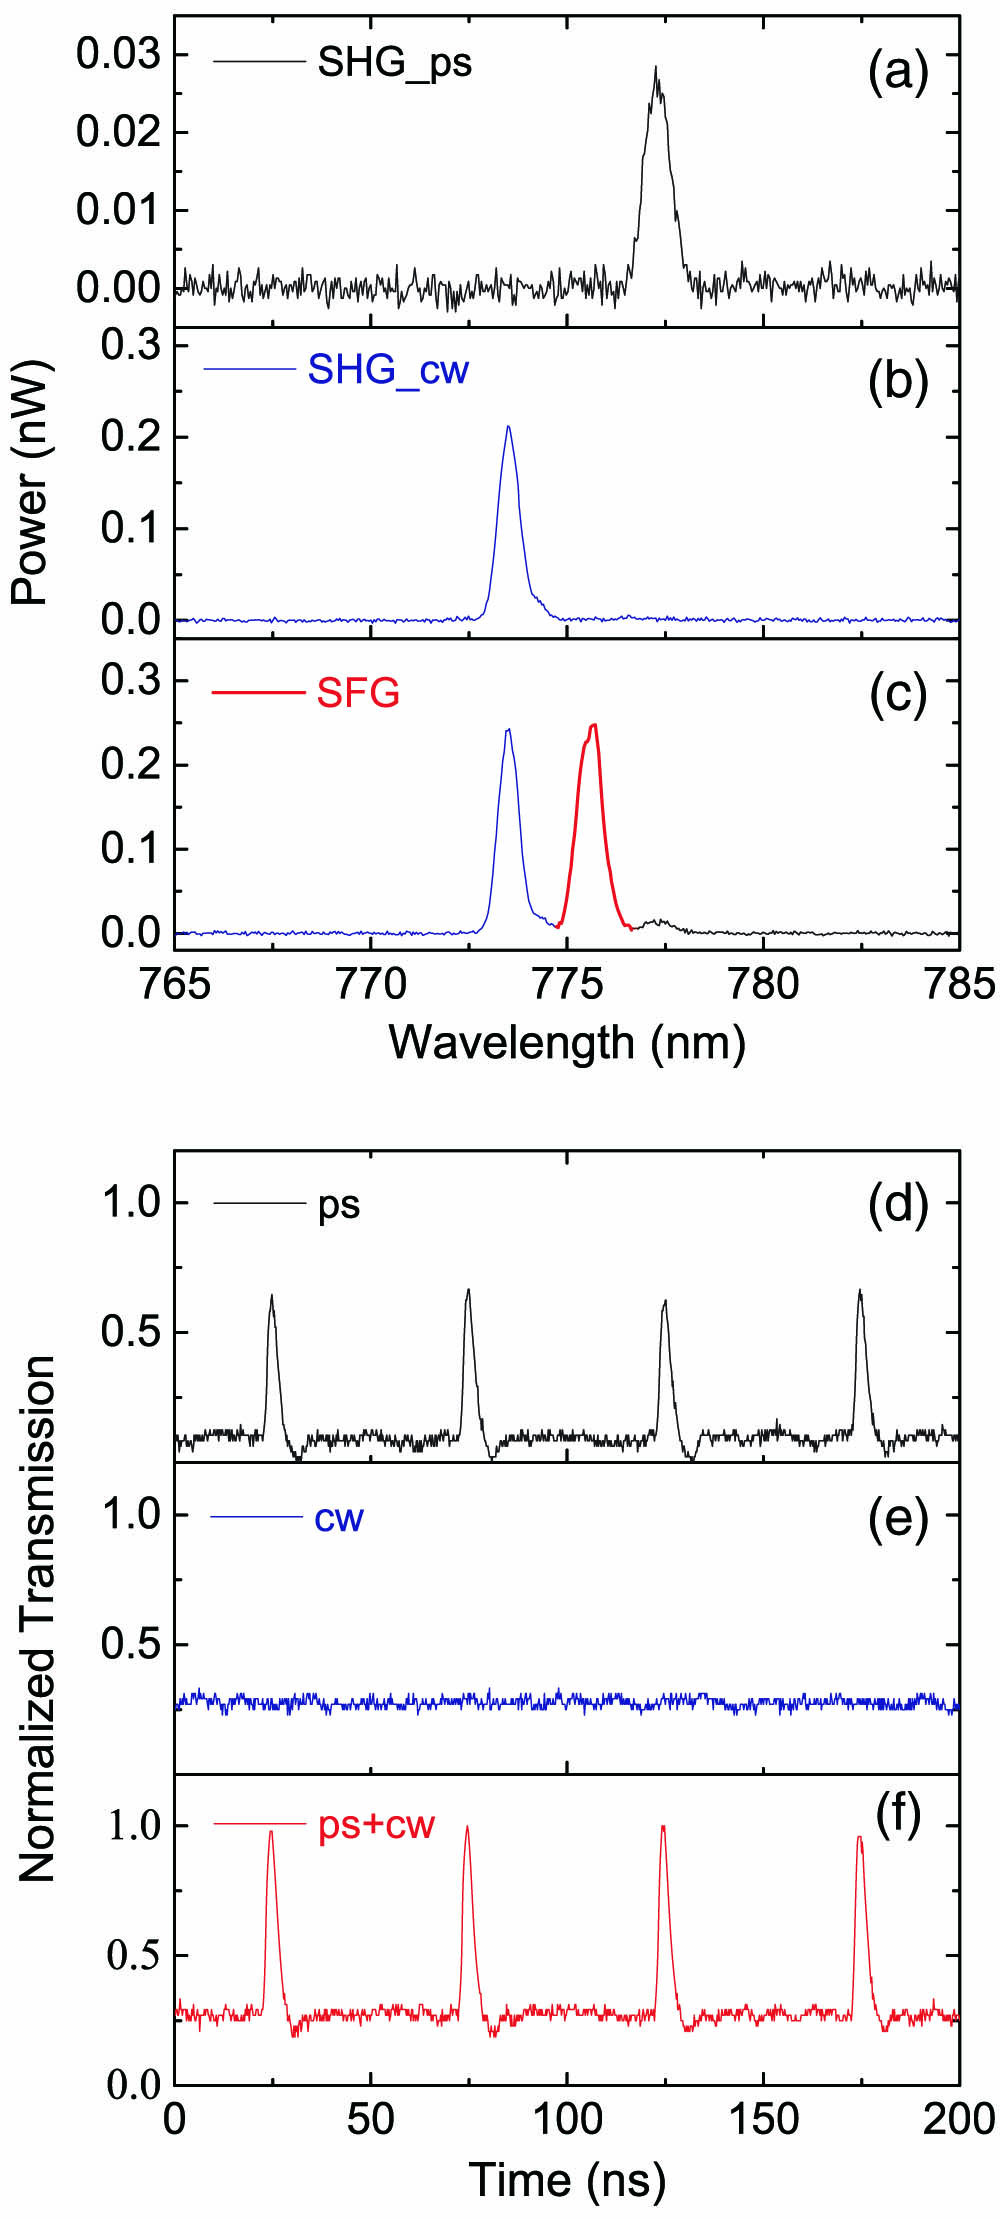 Spectra of nonlinear optical signals and the corresponding transmission of the pump. SHG signals of (a) pulsed and (b) cw pumps, respectively. (c) SFG (red bold line) and SHG signals (blue and black lines) obtained when both cw and pulsed pump lasers were coupled into the LN resonator. (d)–(f) Typical transmission of the pump correspond to (a)–(c), respectively. The wavelengths (input power) of the cw and pulsed lasers were 1547.0 and 1554.6 nm (8.02 and 0.52 mW), respectively.